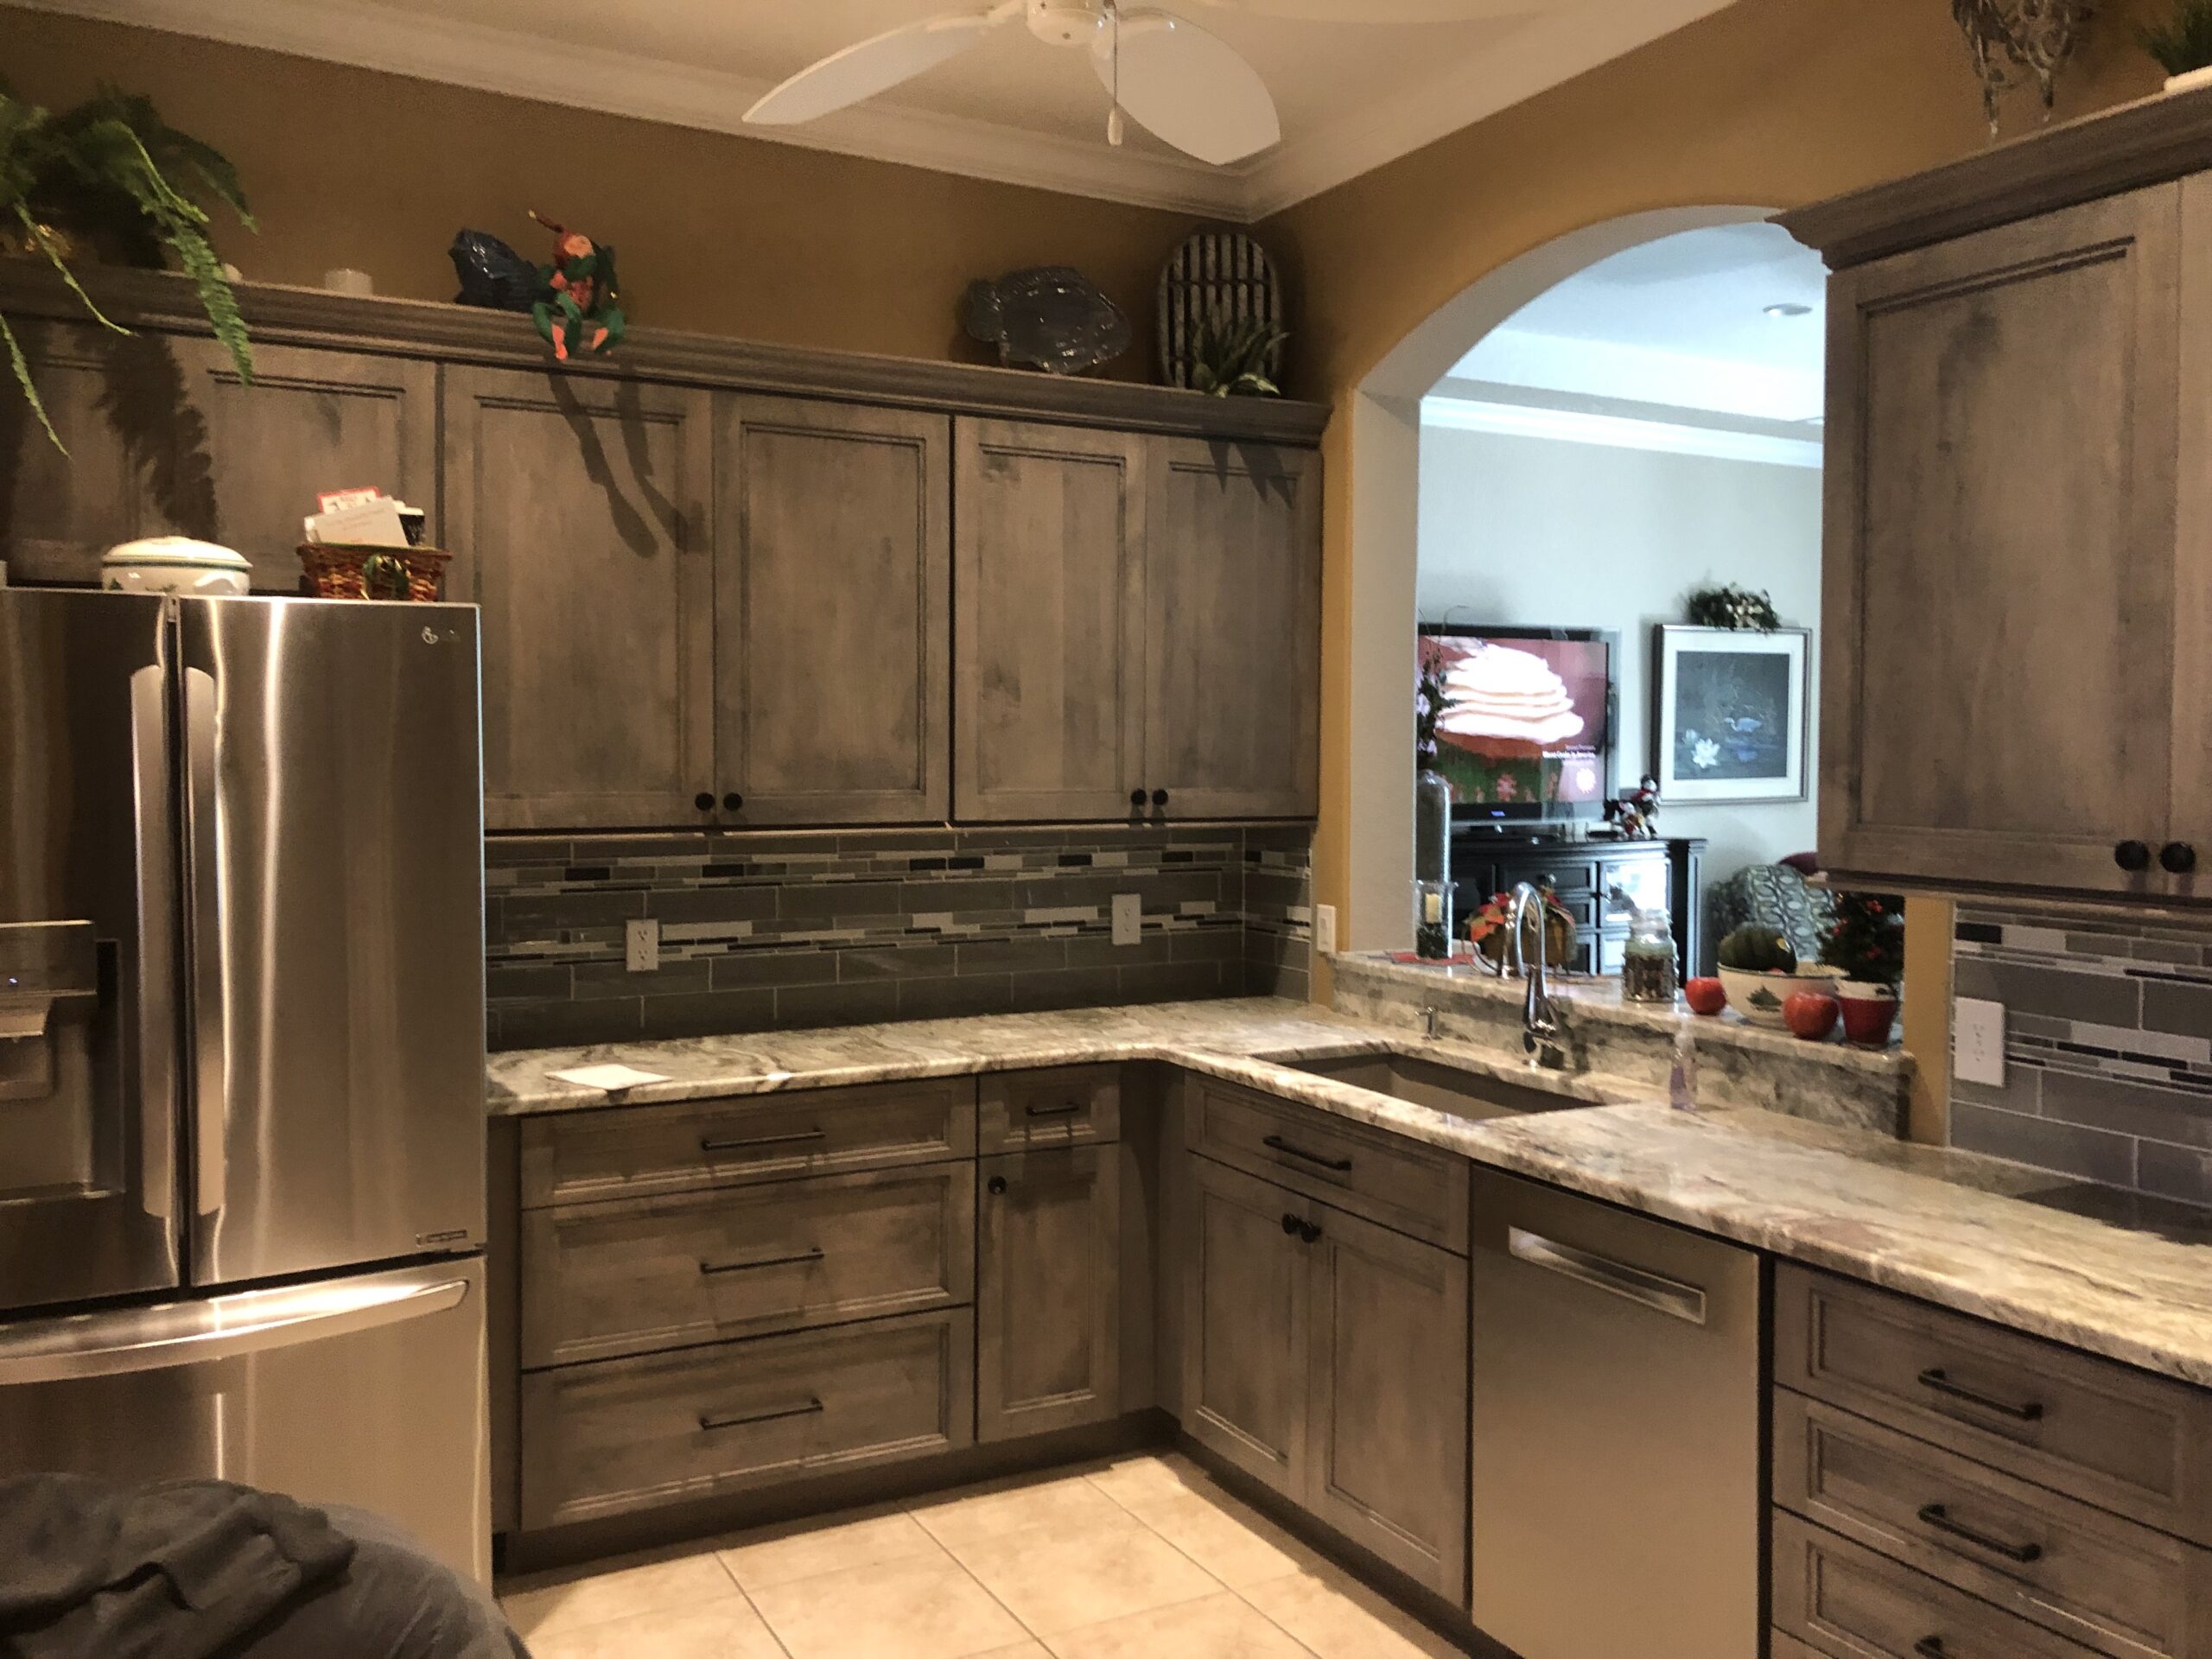 Modern, Stylish, and High Quality Stained Cherry Kitchen Cabinet Refacing in Apollo Beach